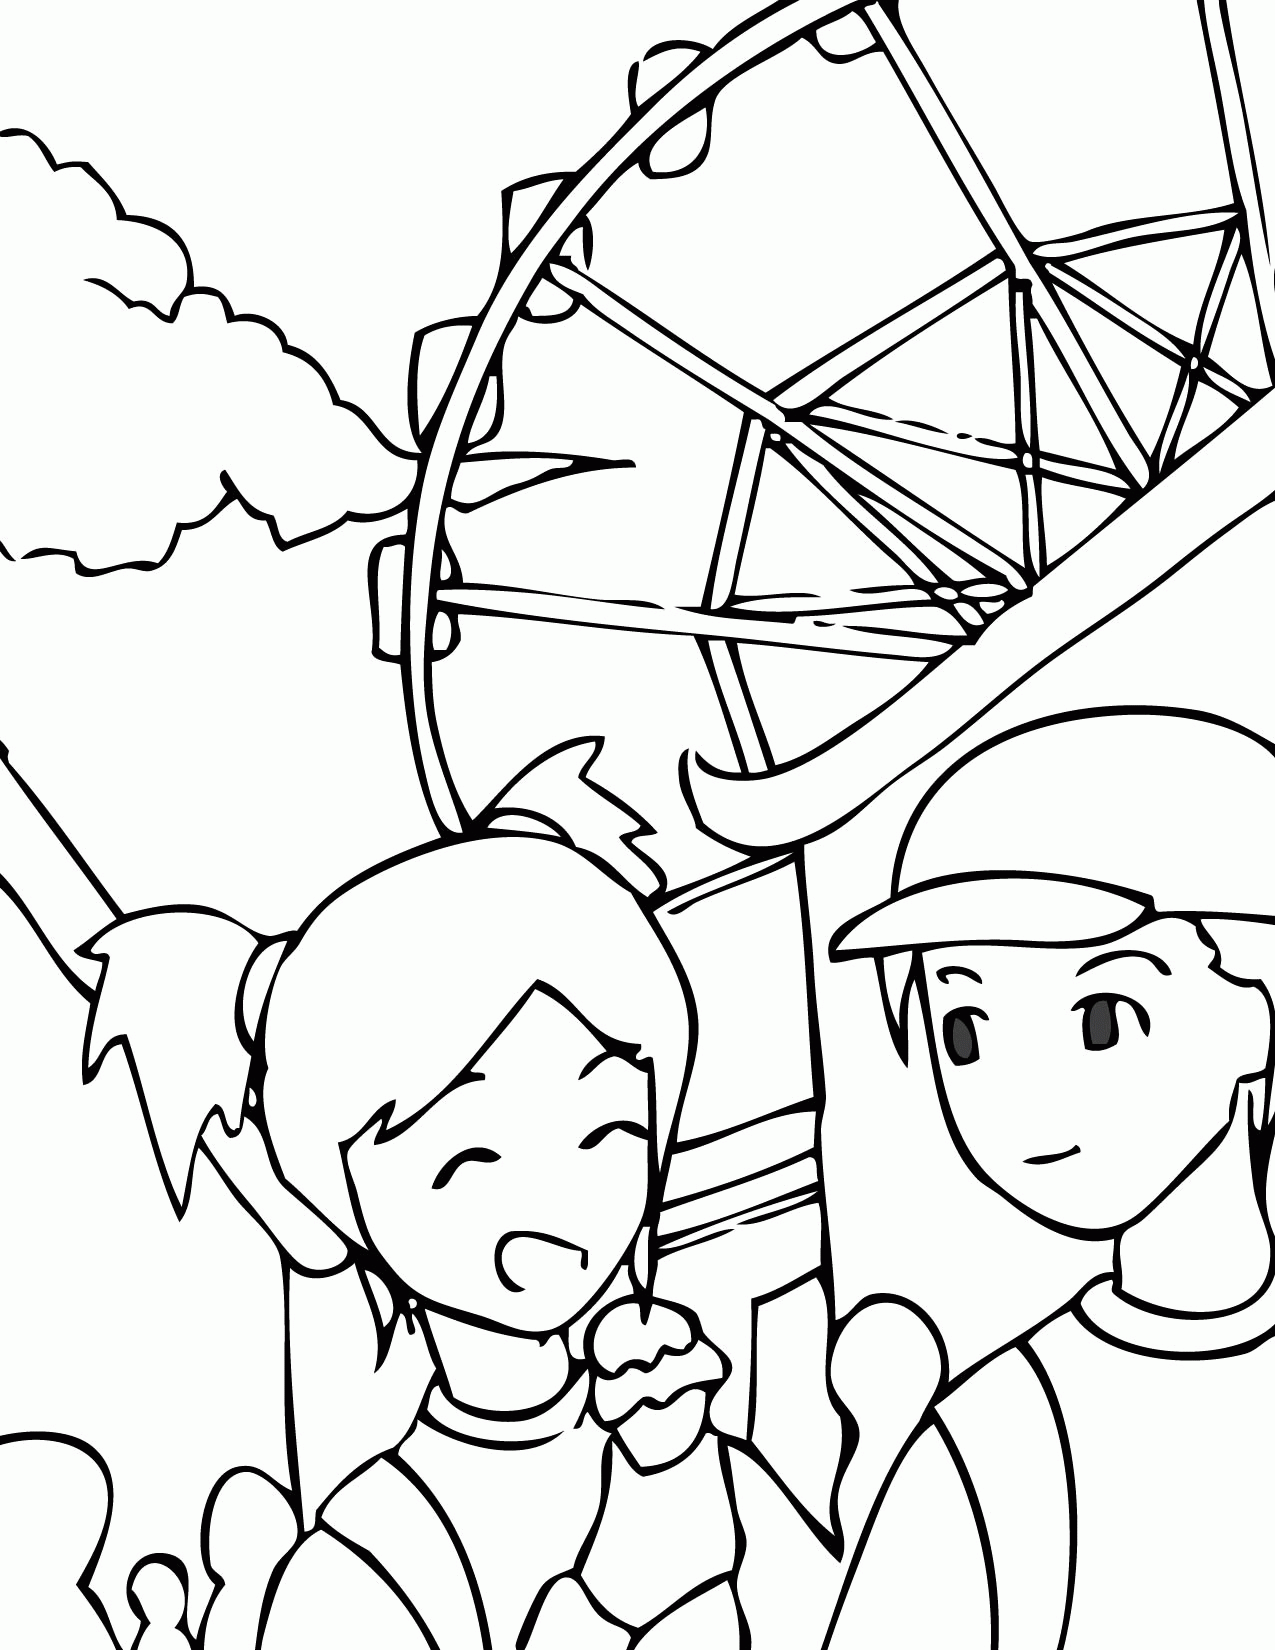 Theme Park Coloring Page - Handipoints